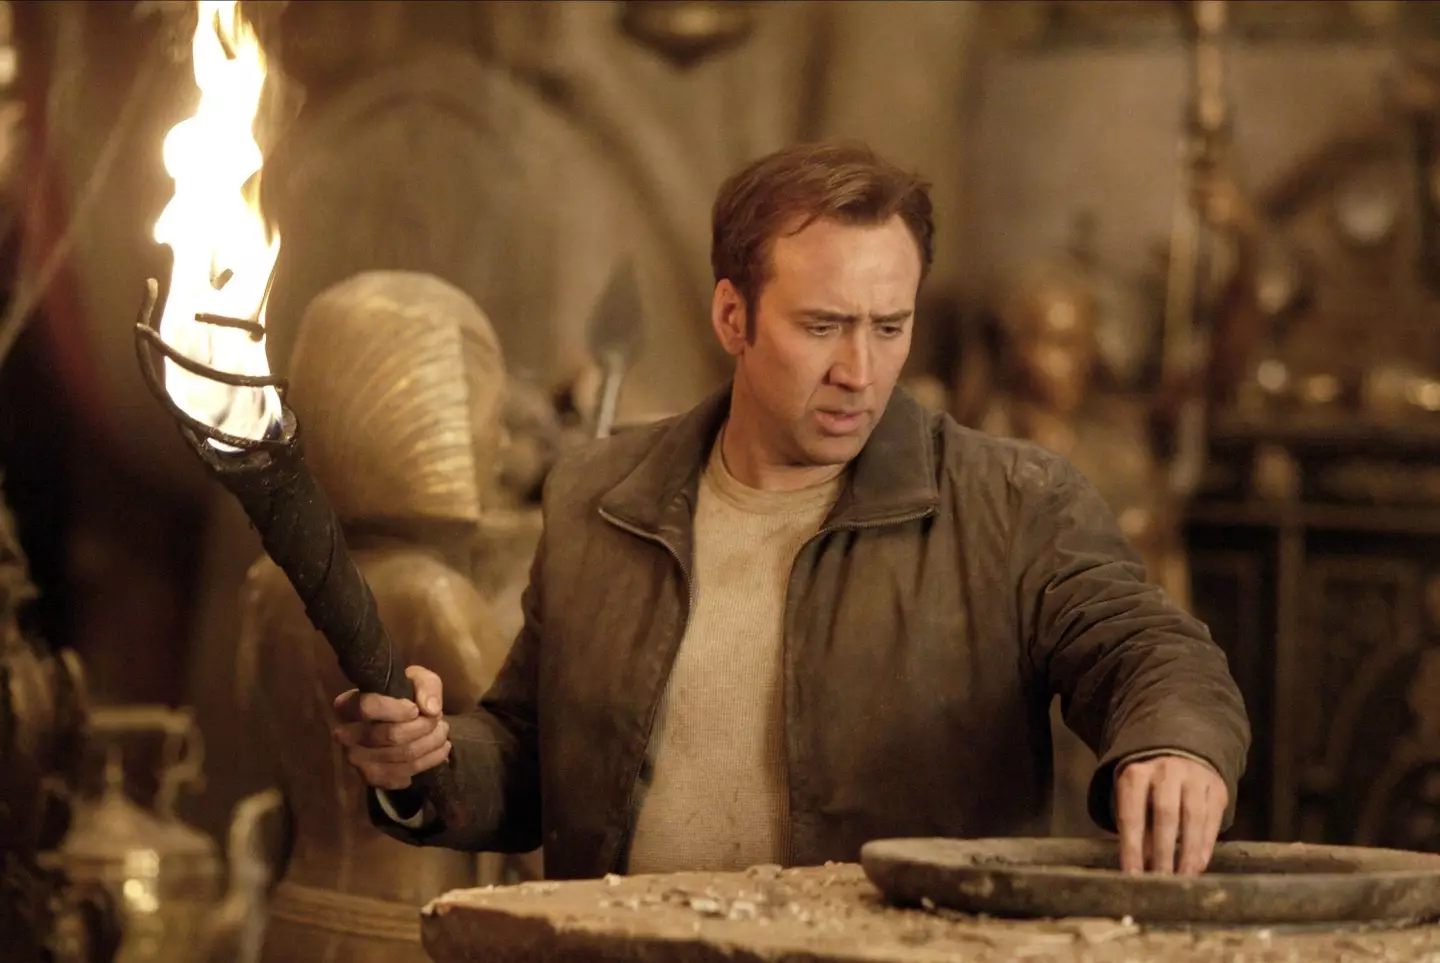 A third instalment of the National Treasure series could be on its way.